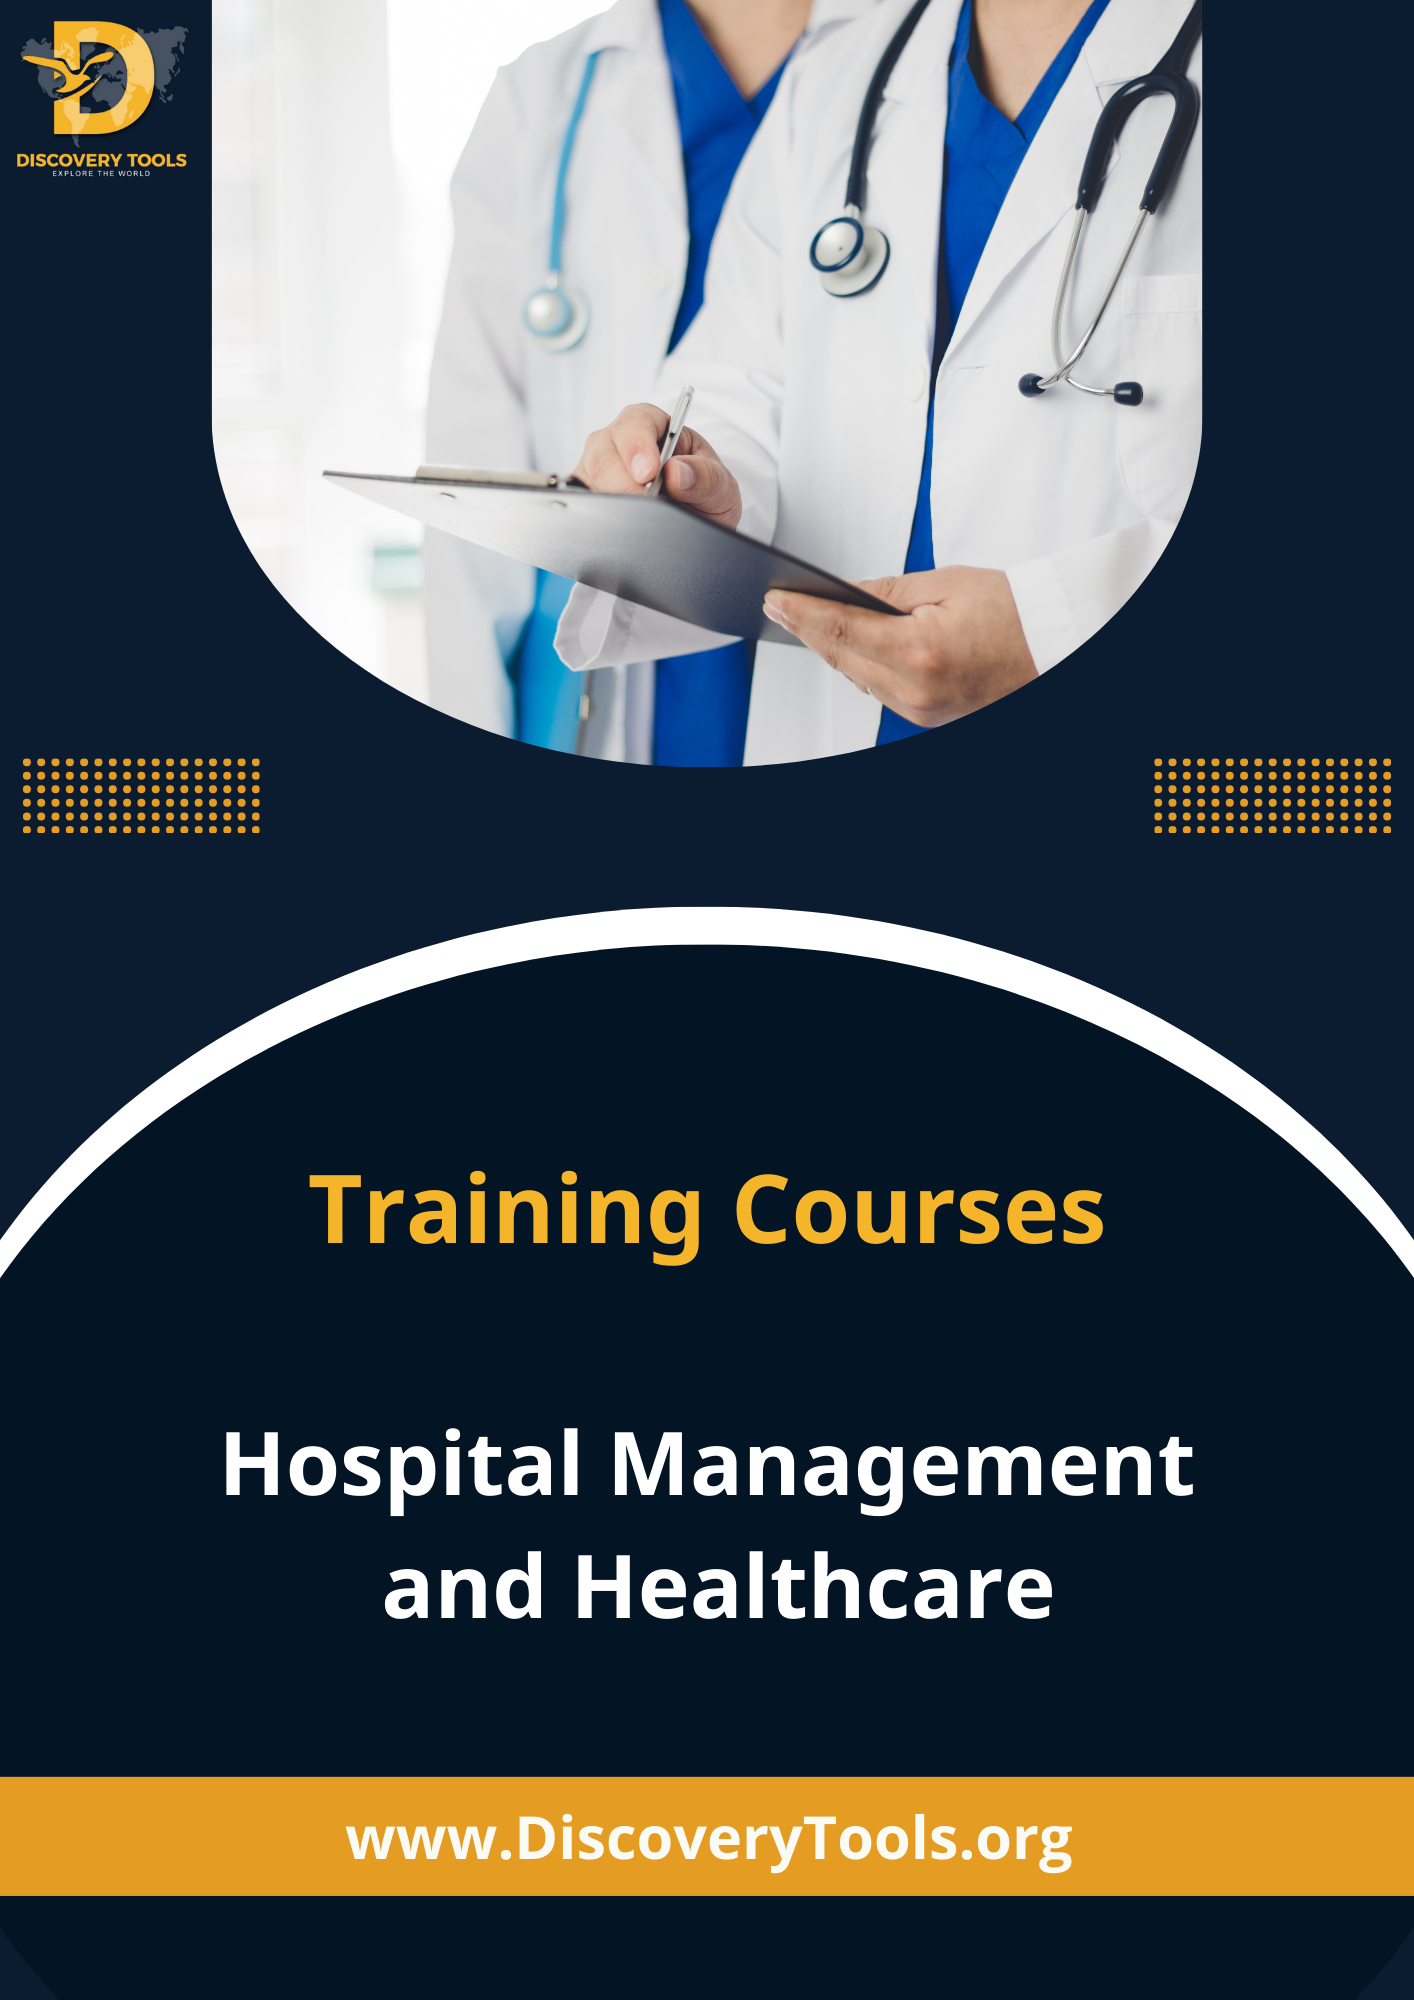 Hospital Management and Healthcare